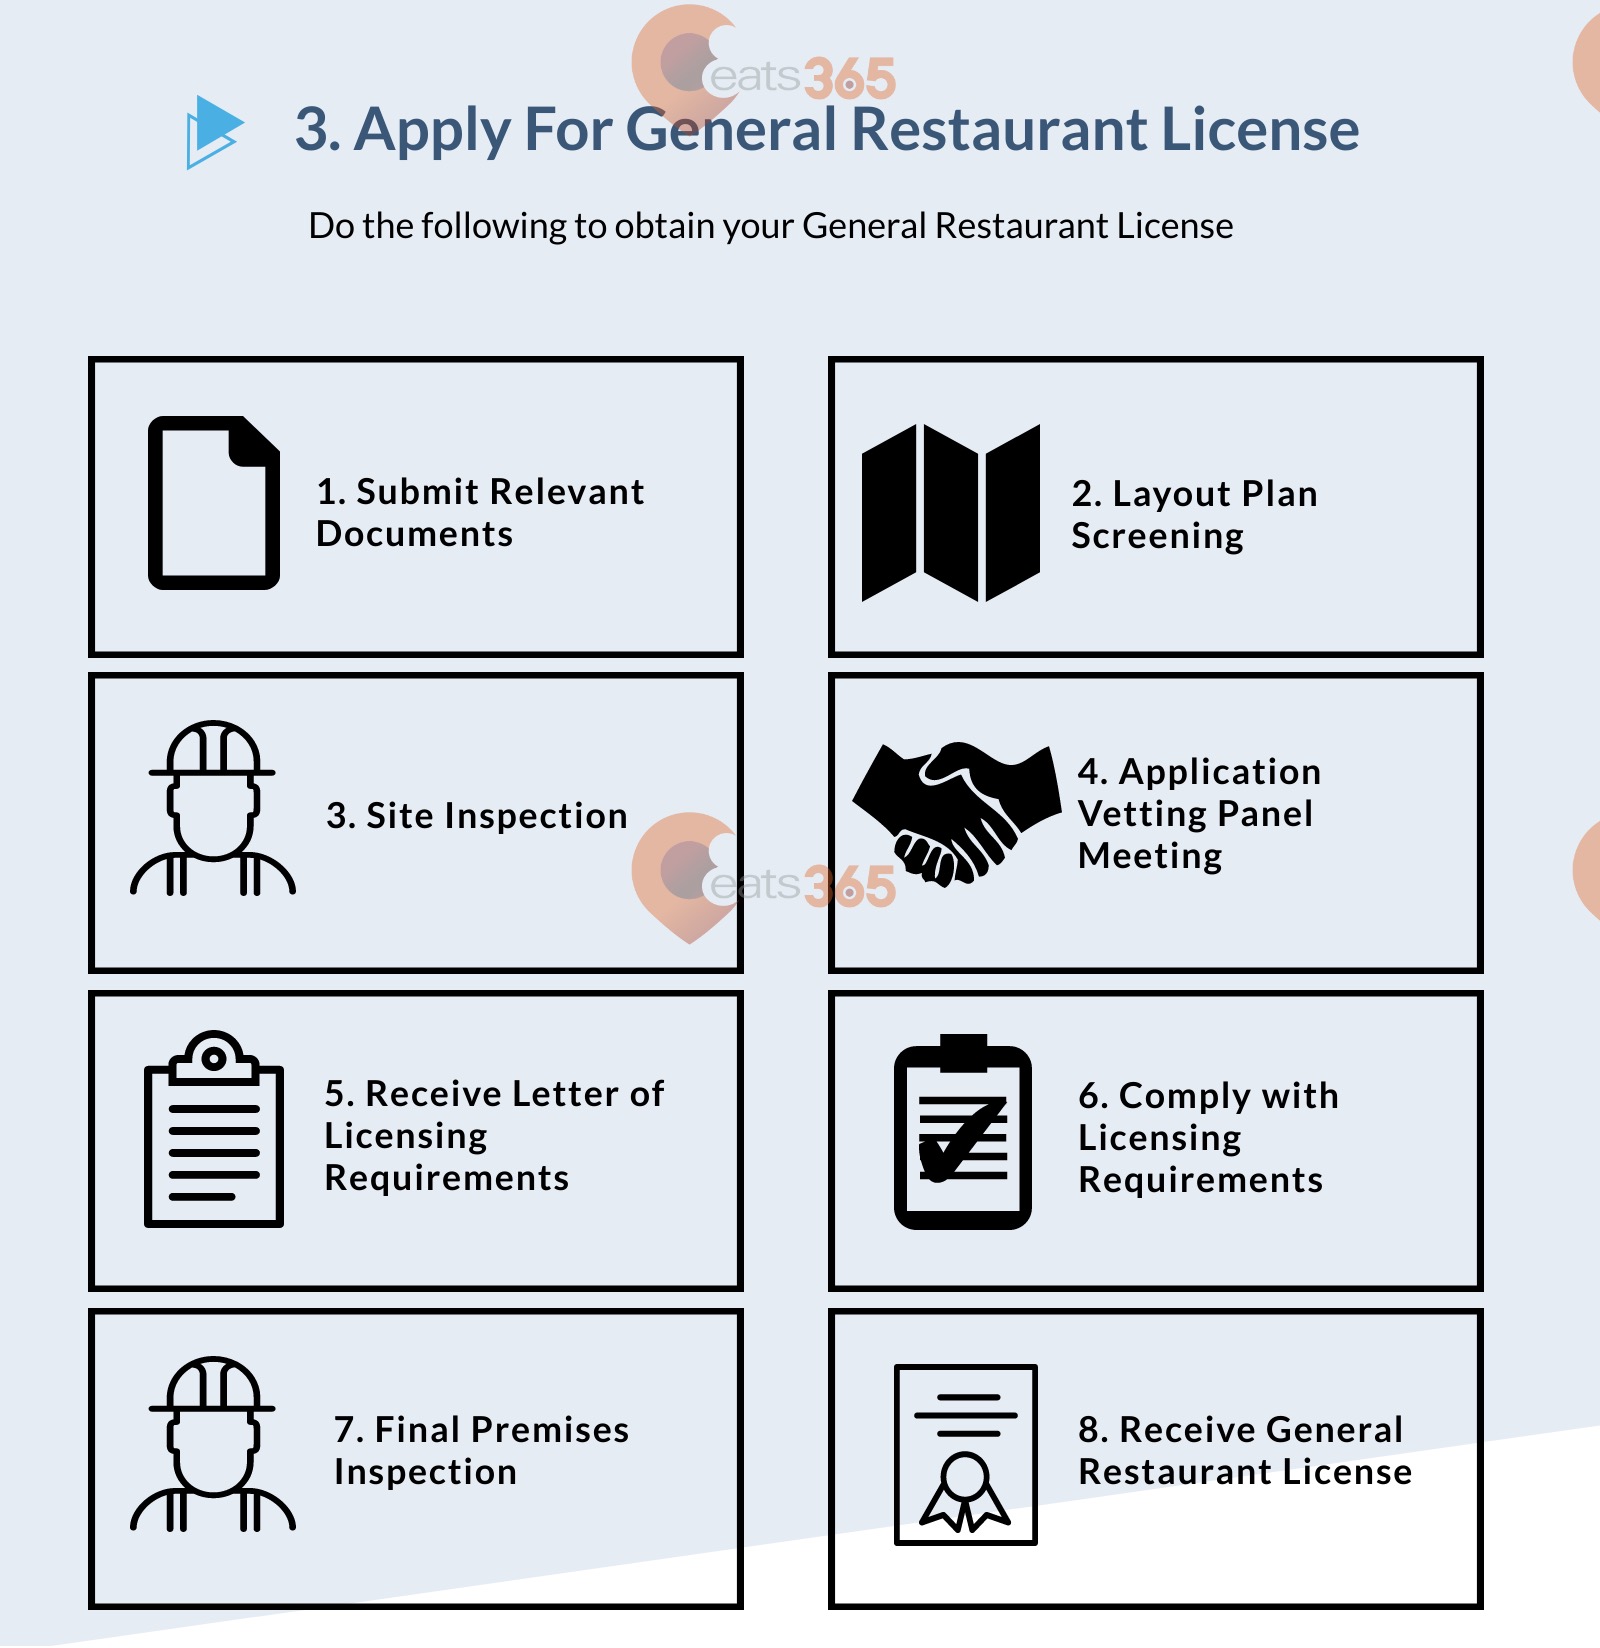 How to apply for general restaurant license Hong Kong